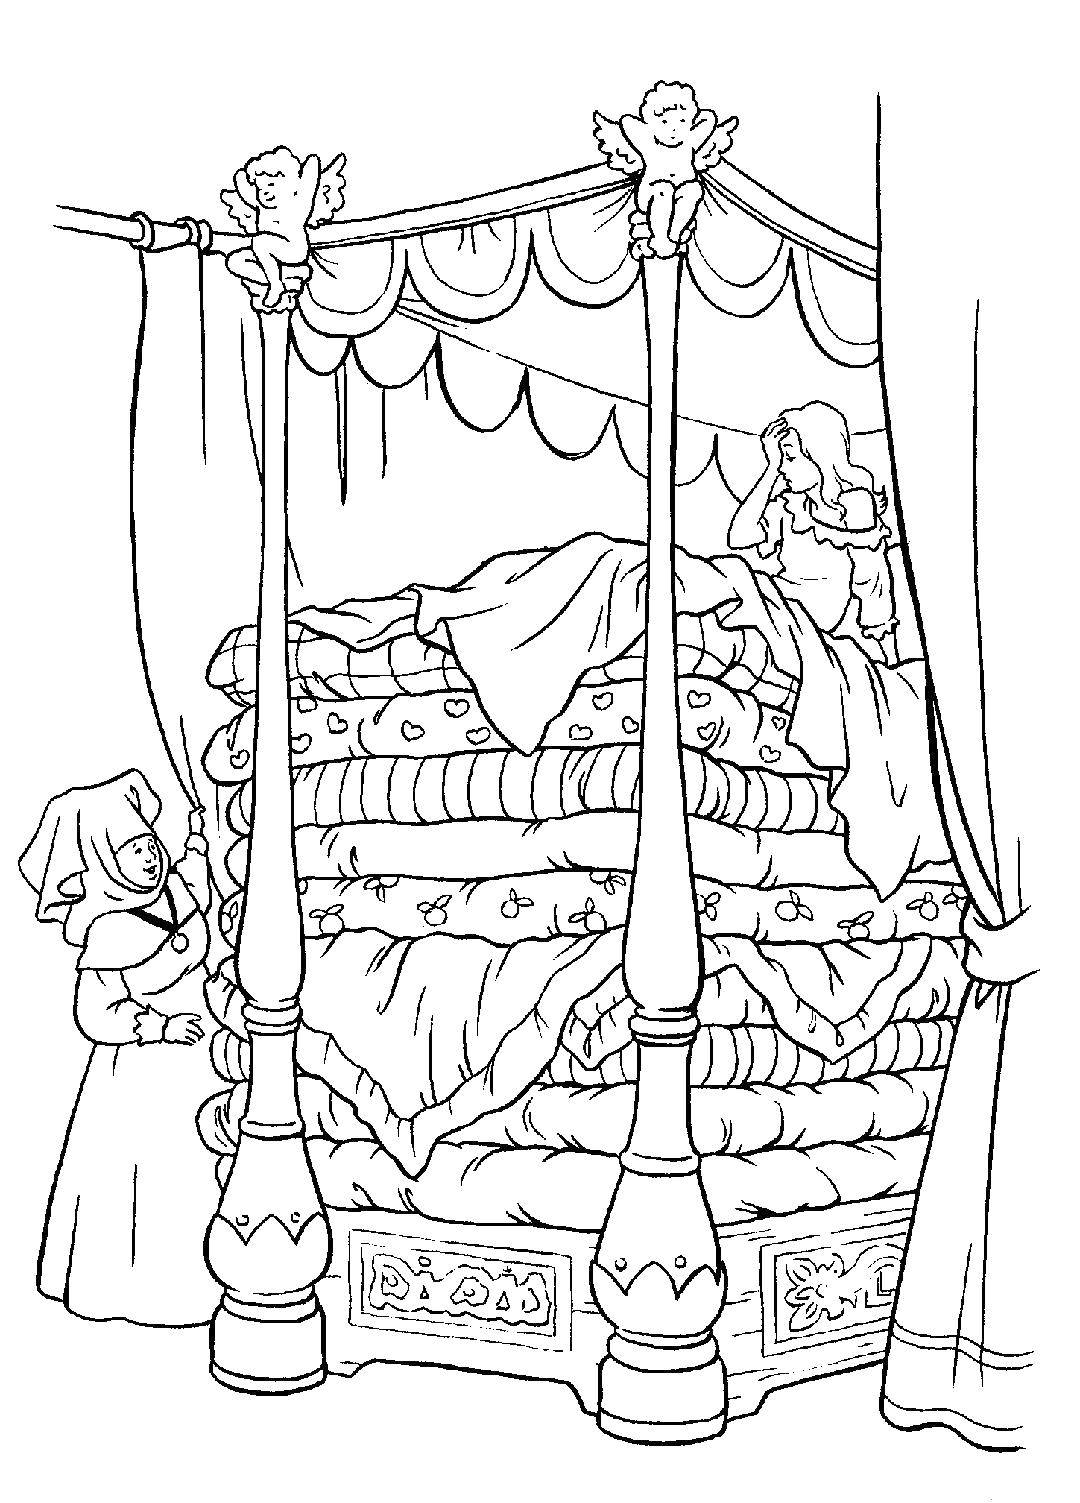 Coloring The Princess and the pea. Category Princess. Tags:  The cartoon character, the Princess and the pea.